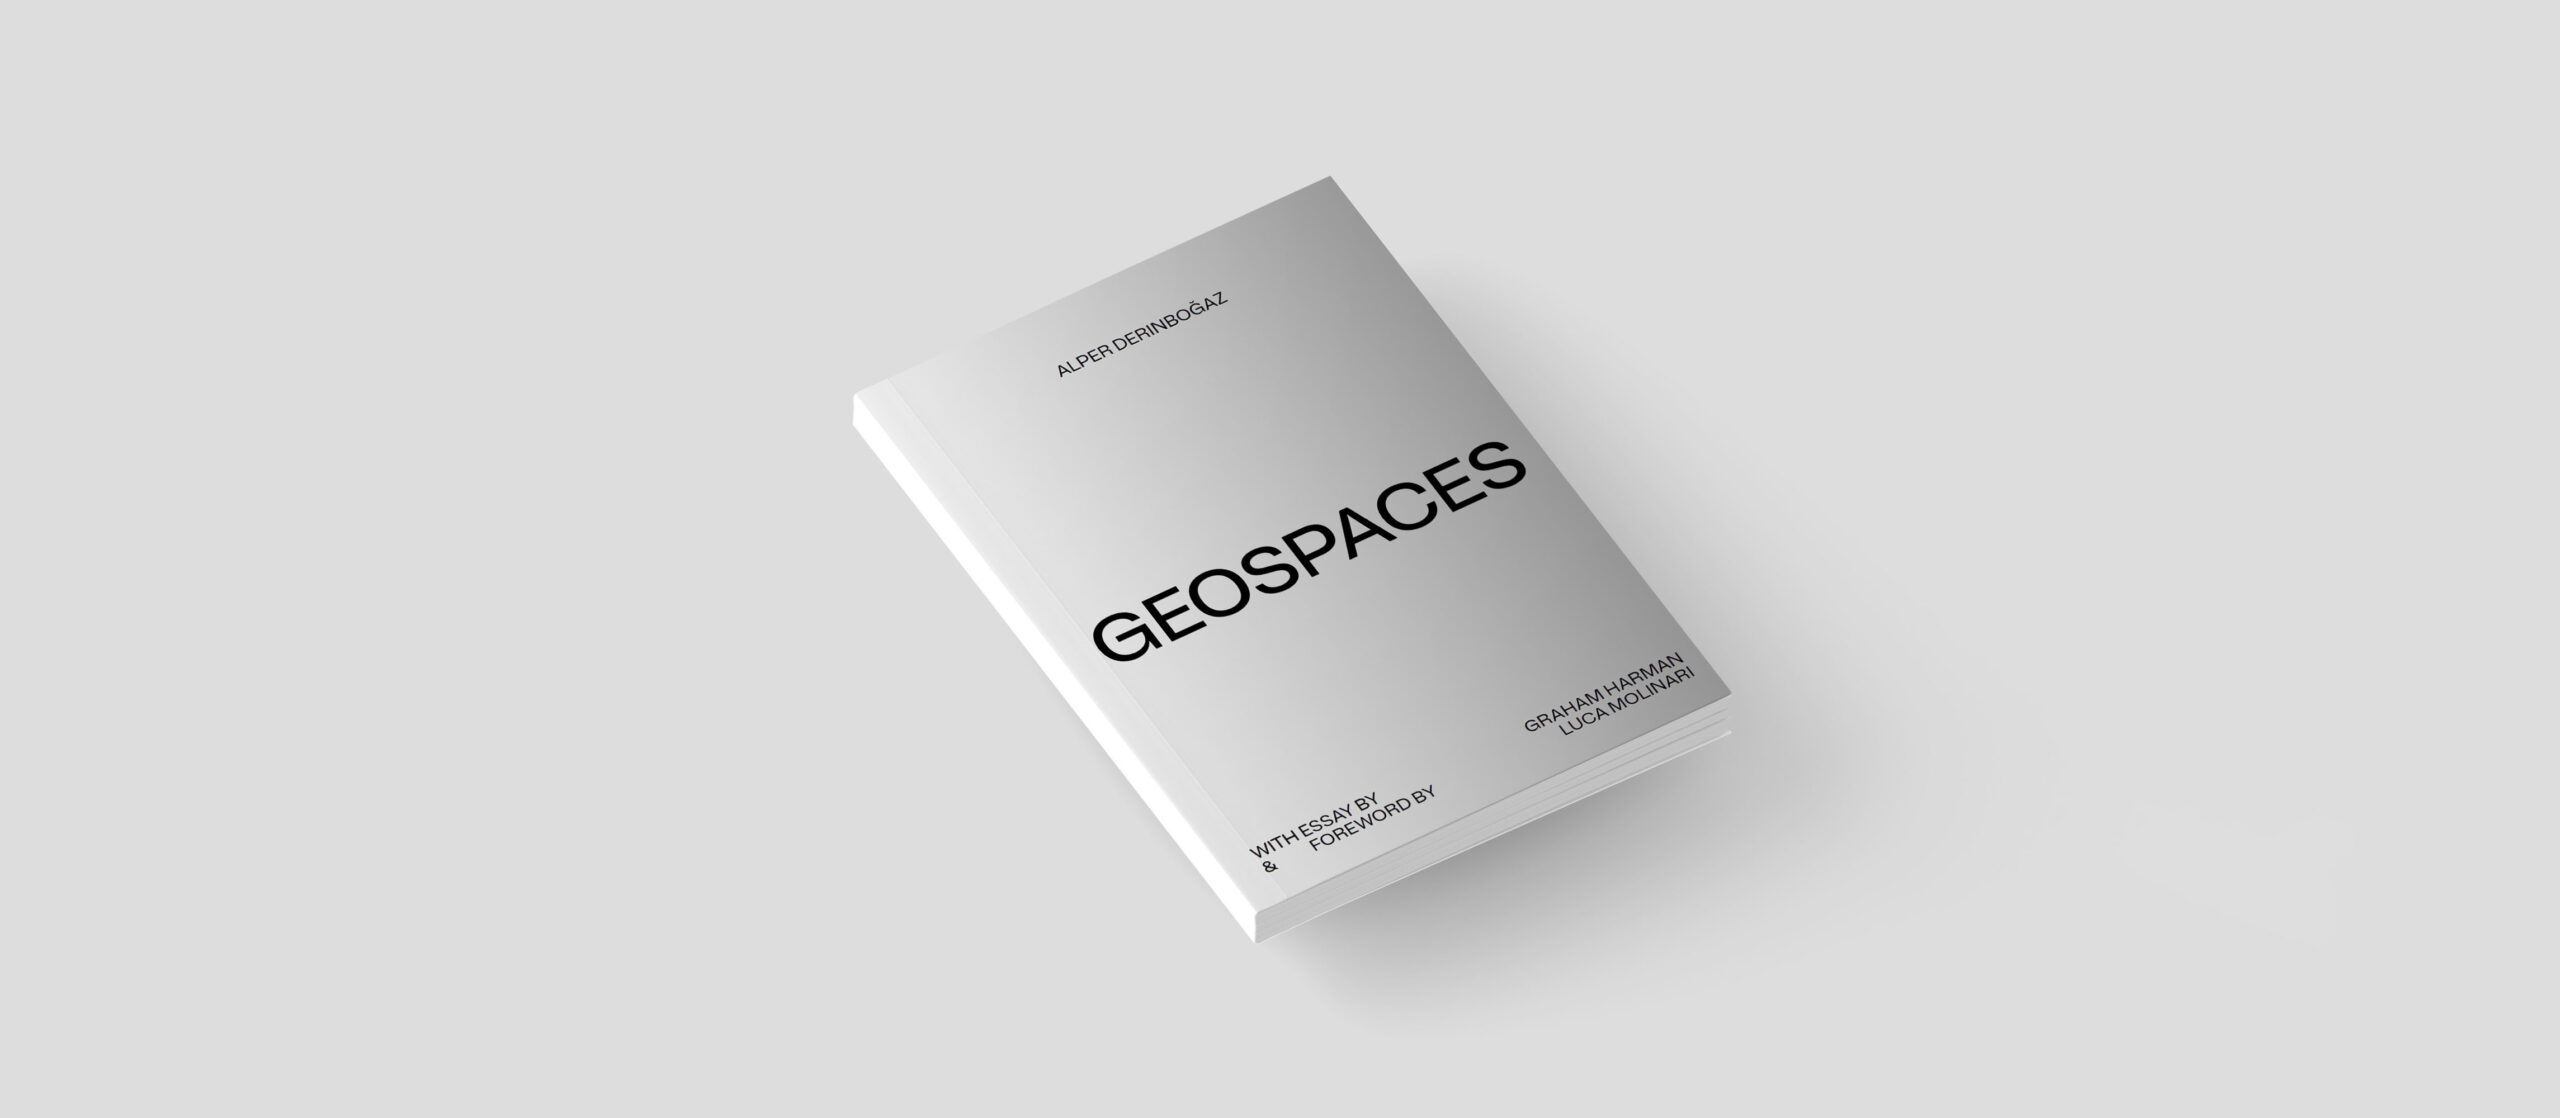 Geospaces Book Launch in Milan!